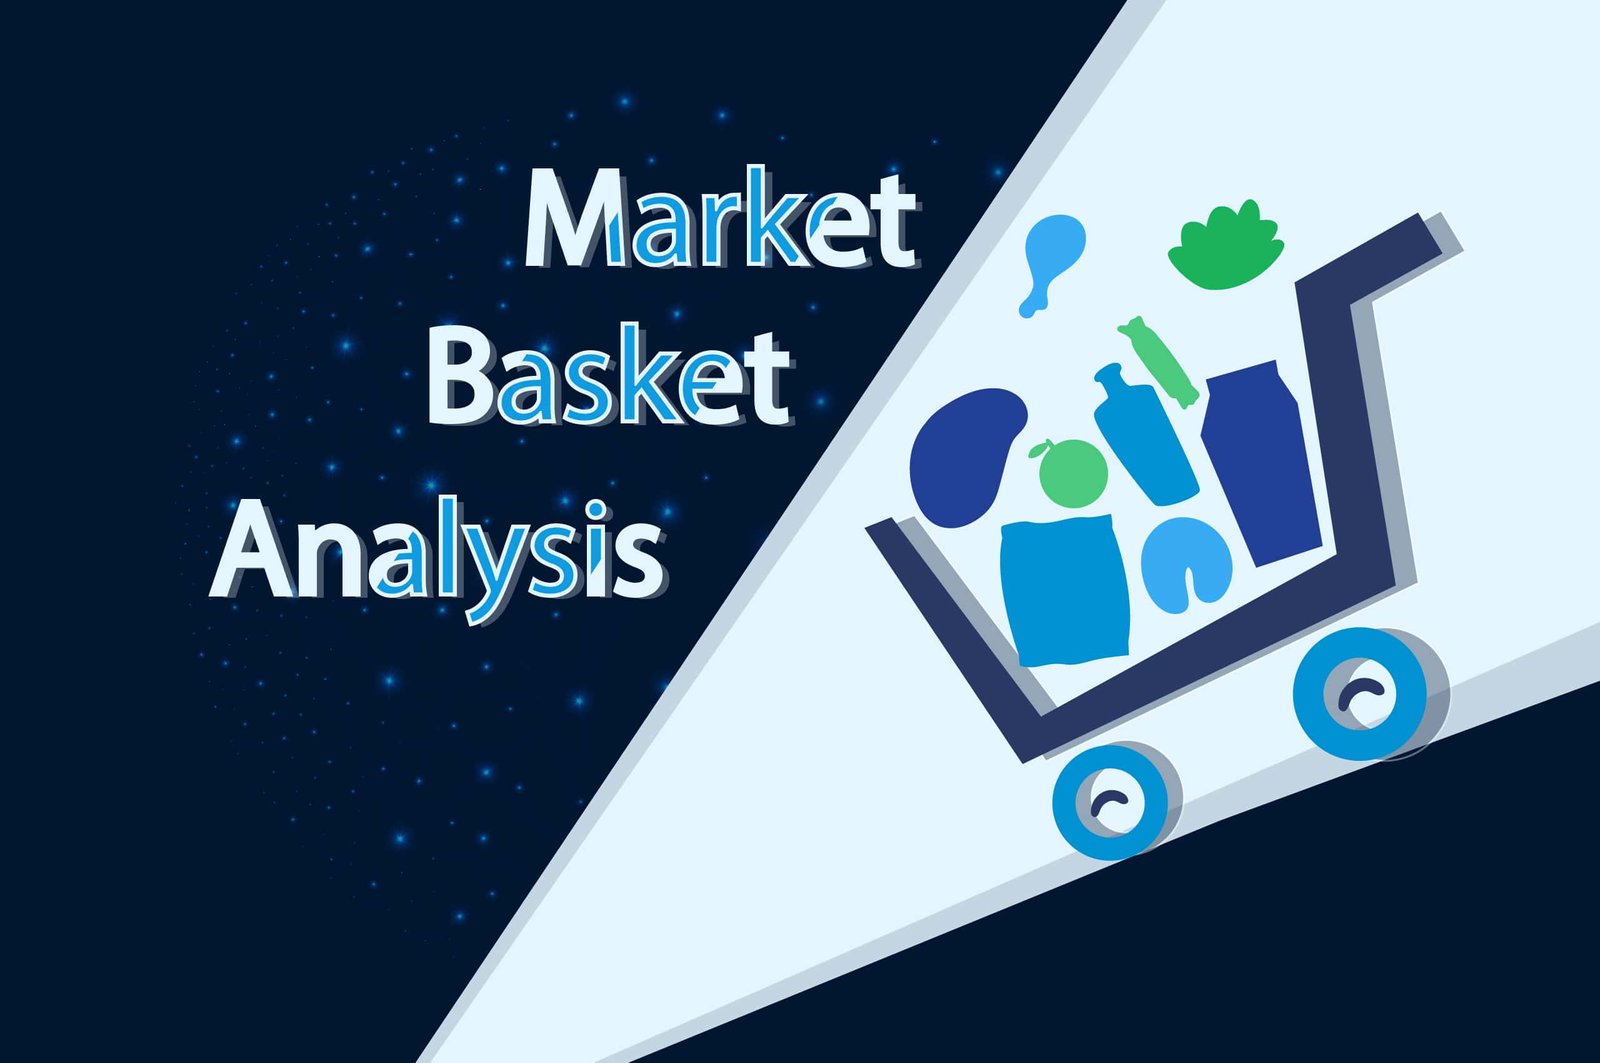 How to Perform Market Basket Analysis in Python?